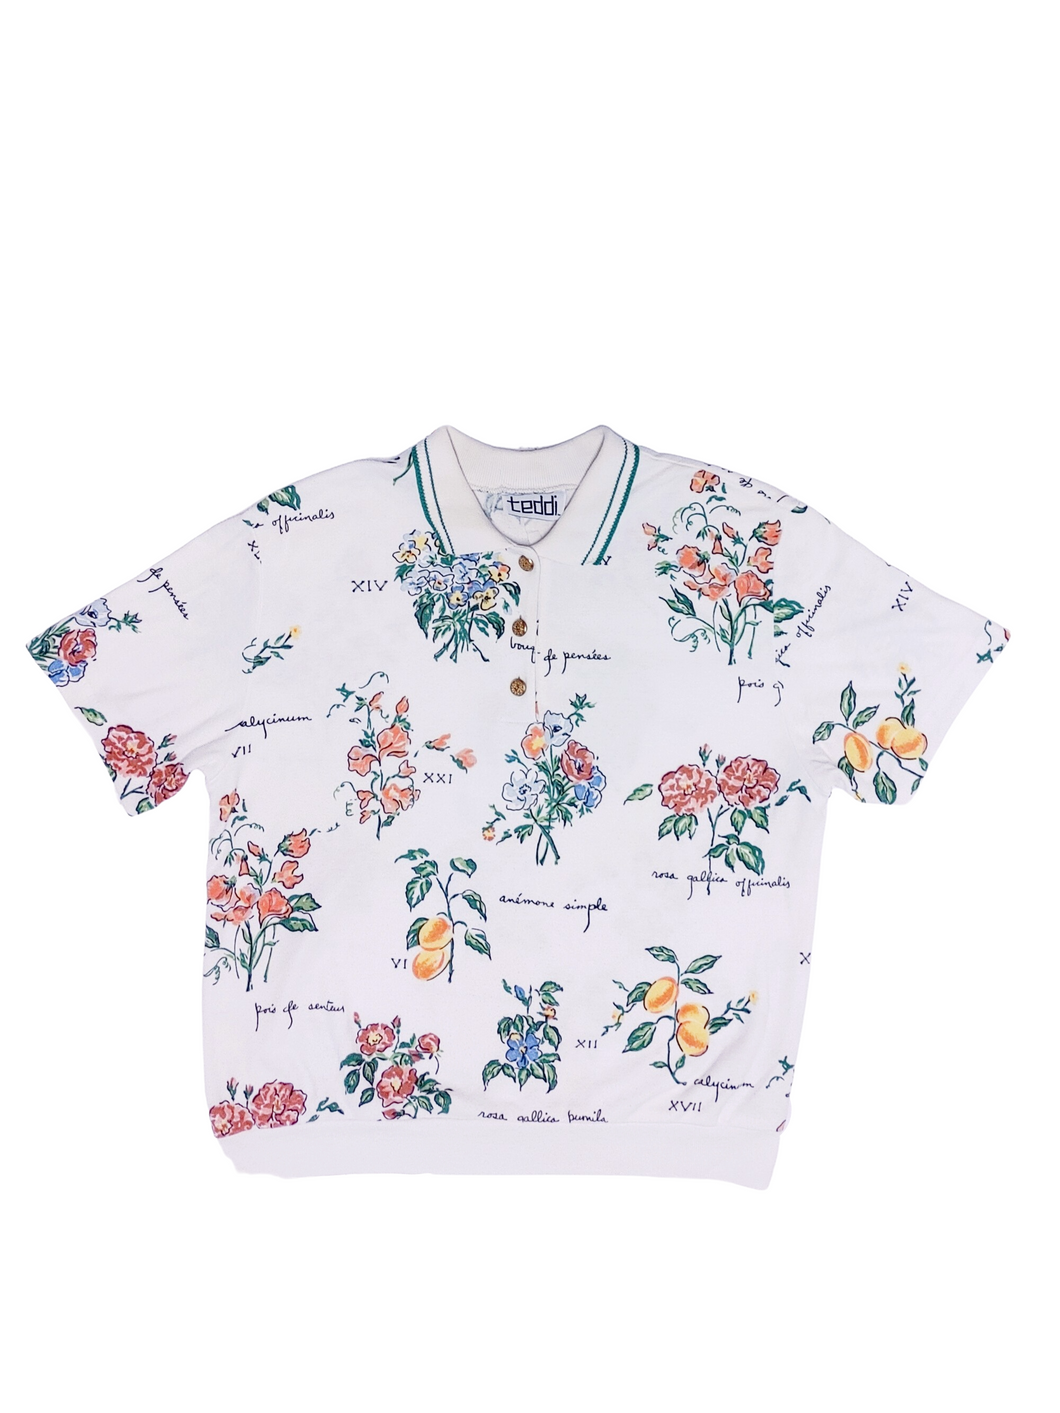 80s All the Flowers Top - Size M